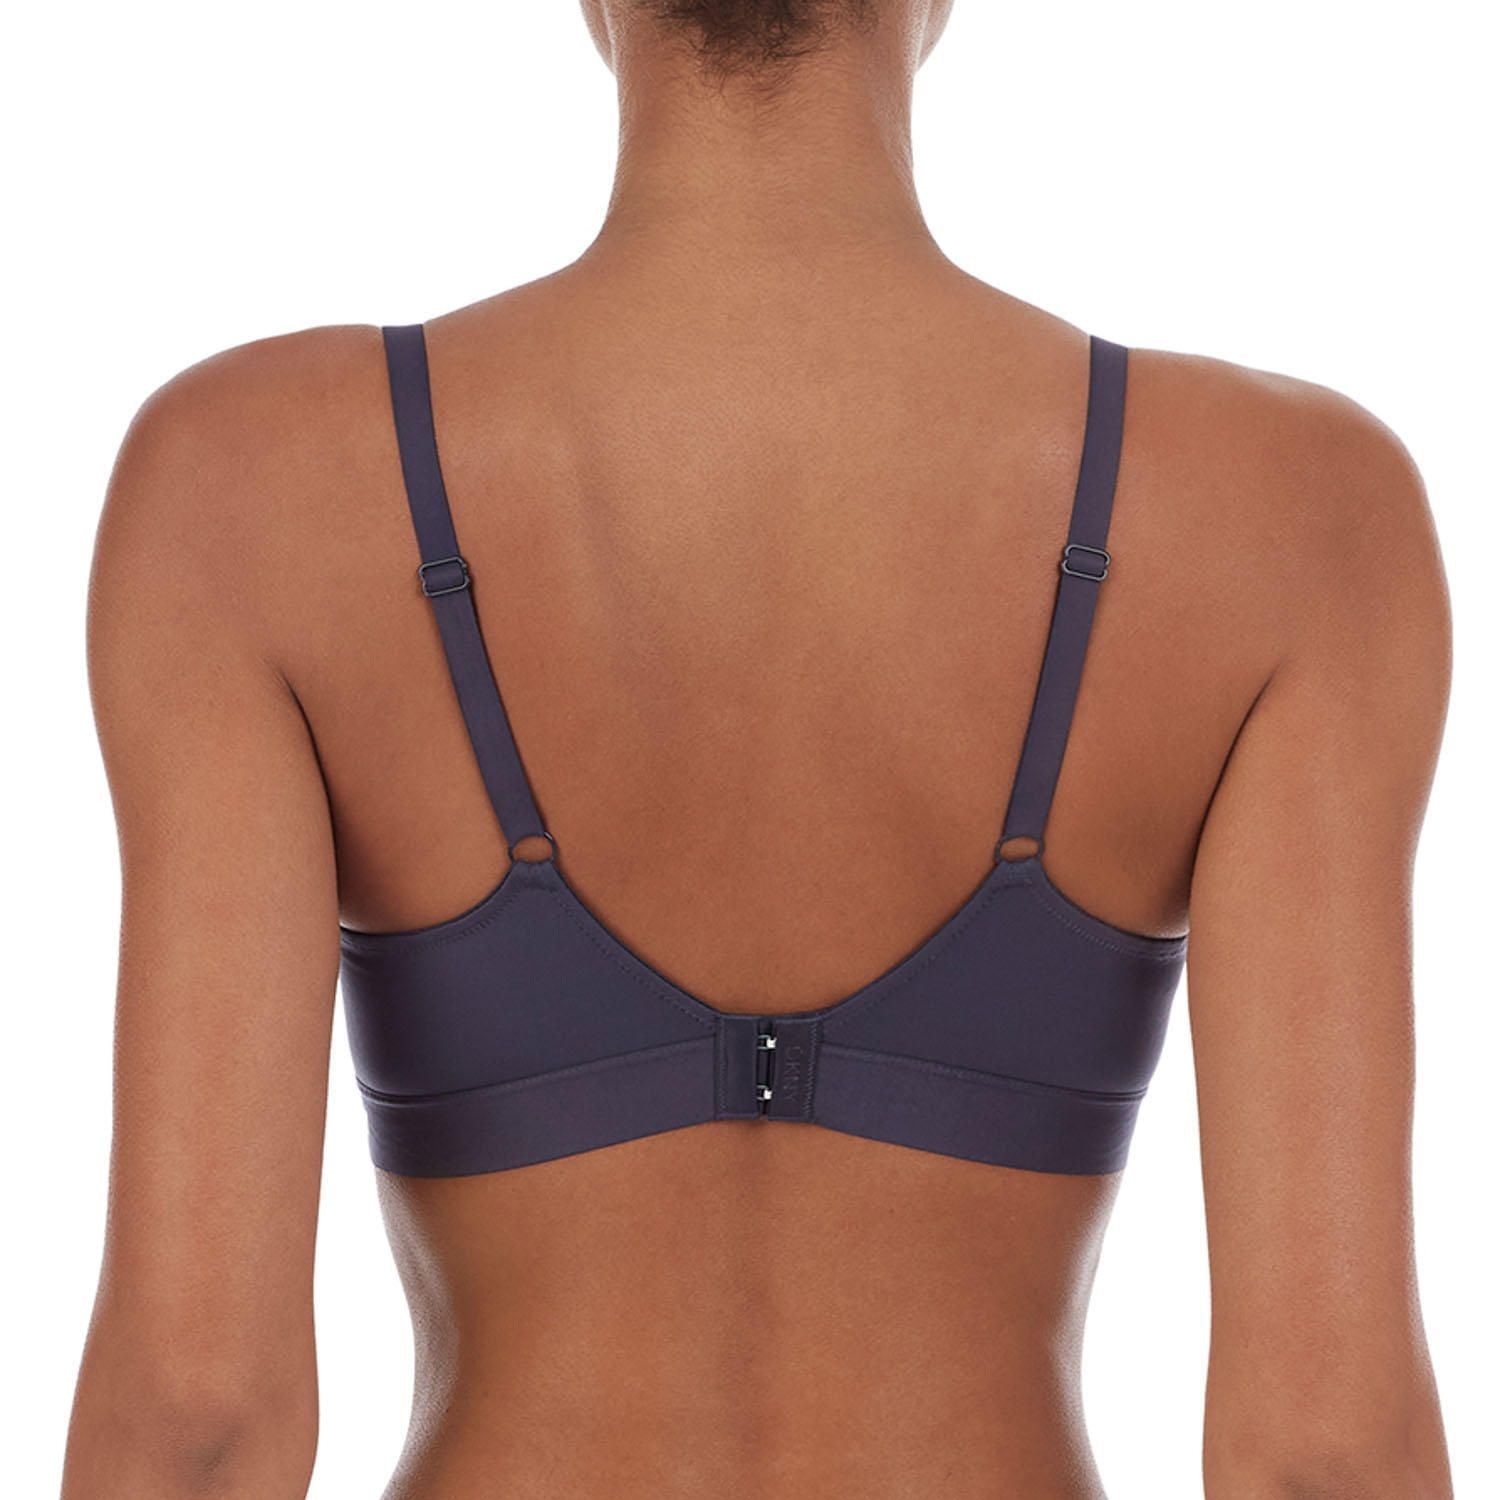 The DKNY Fusion Perfect Bra Is a Bad-@ss Brassiere - Makeup and